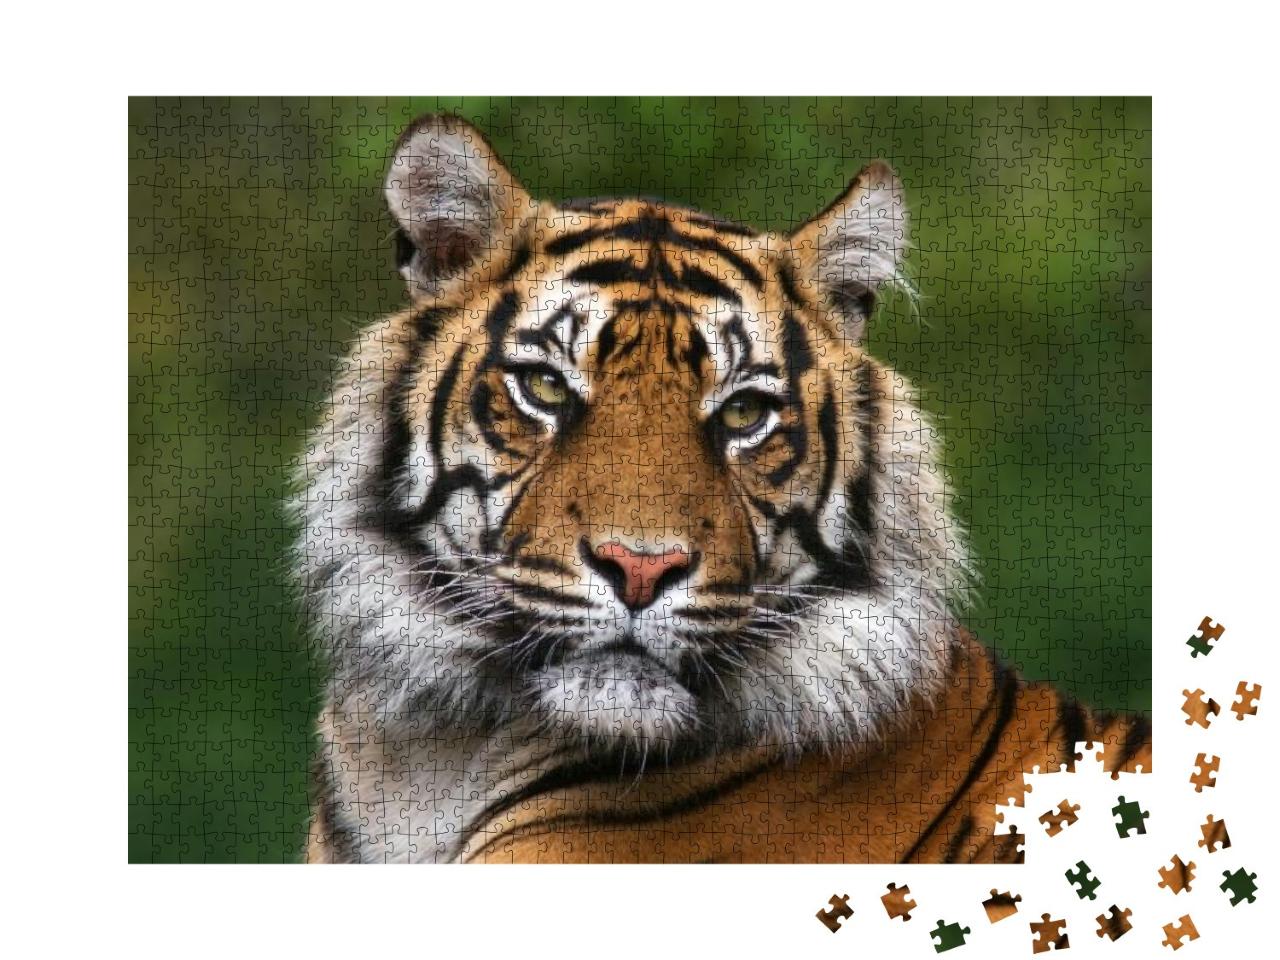 Tiger, Portrait of a Bengal Tiger... Jigsaw Puzzle with 1000 pieces